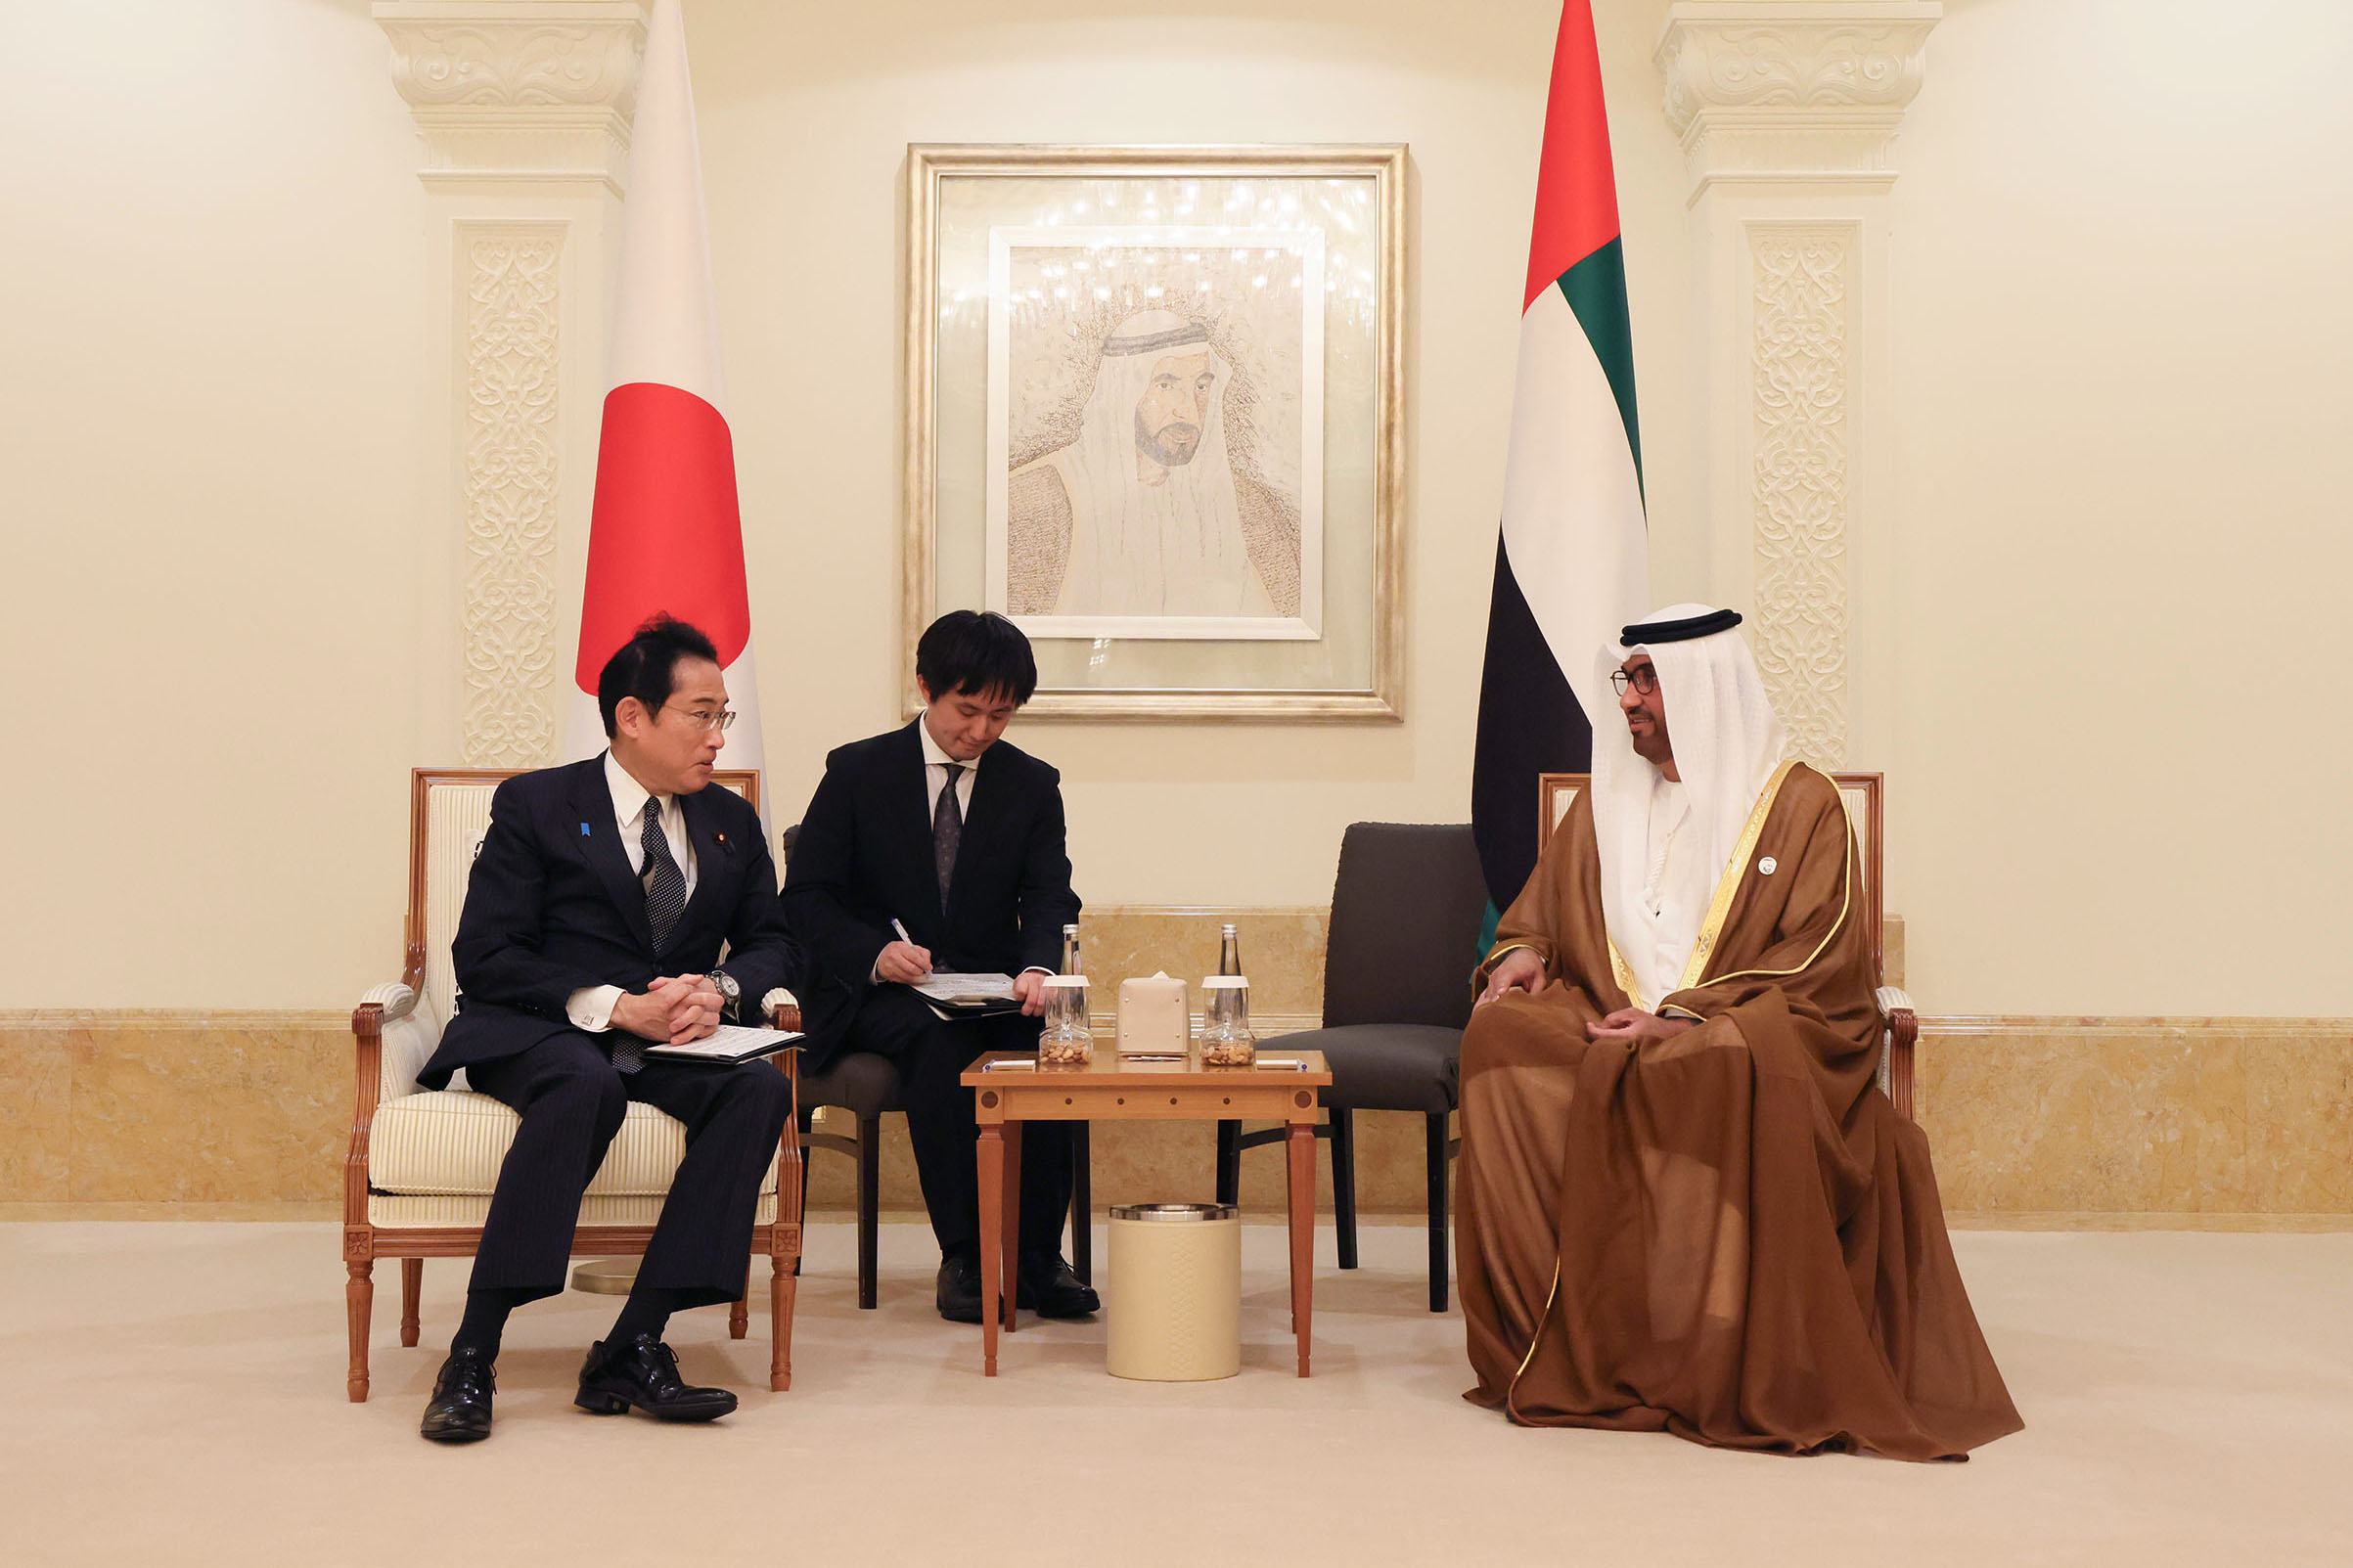 Prime Minister Kishida holding a meeting with Minister of Industry and Advanced Technology Sultan Ahmed Al Jaber